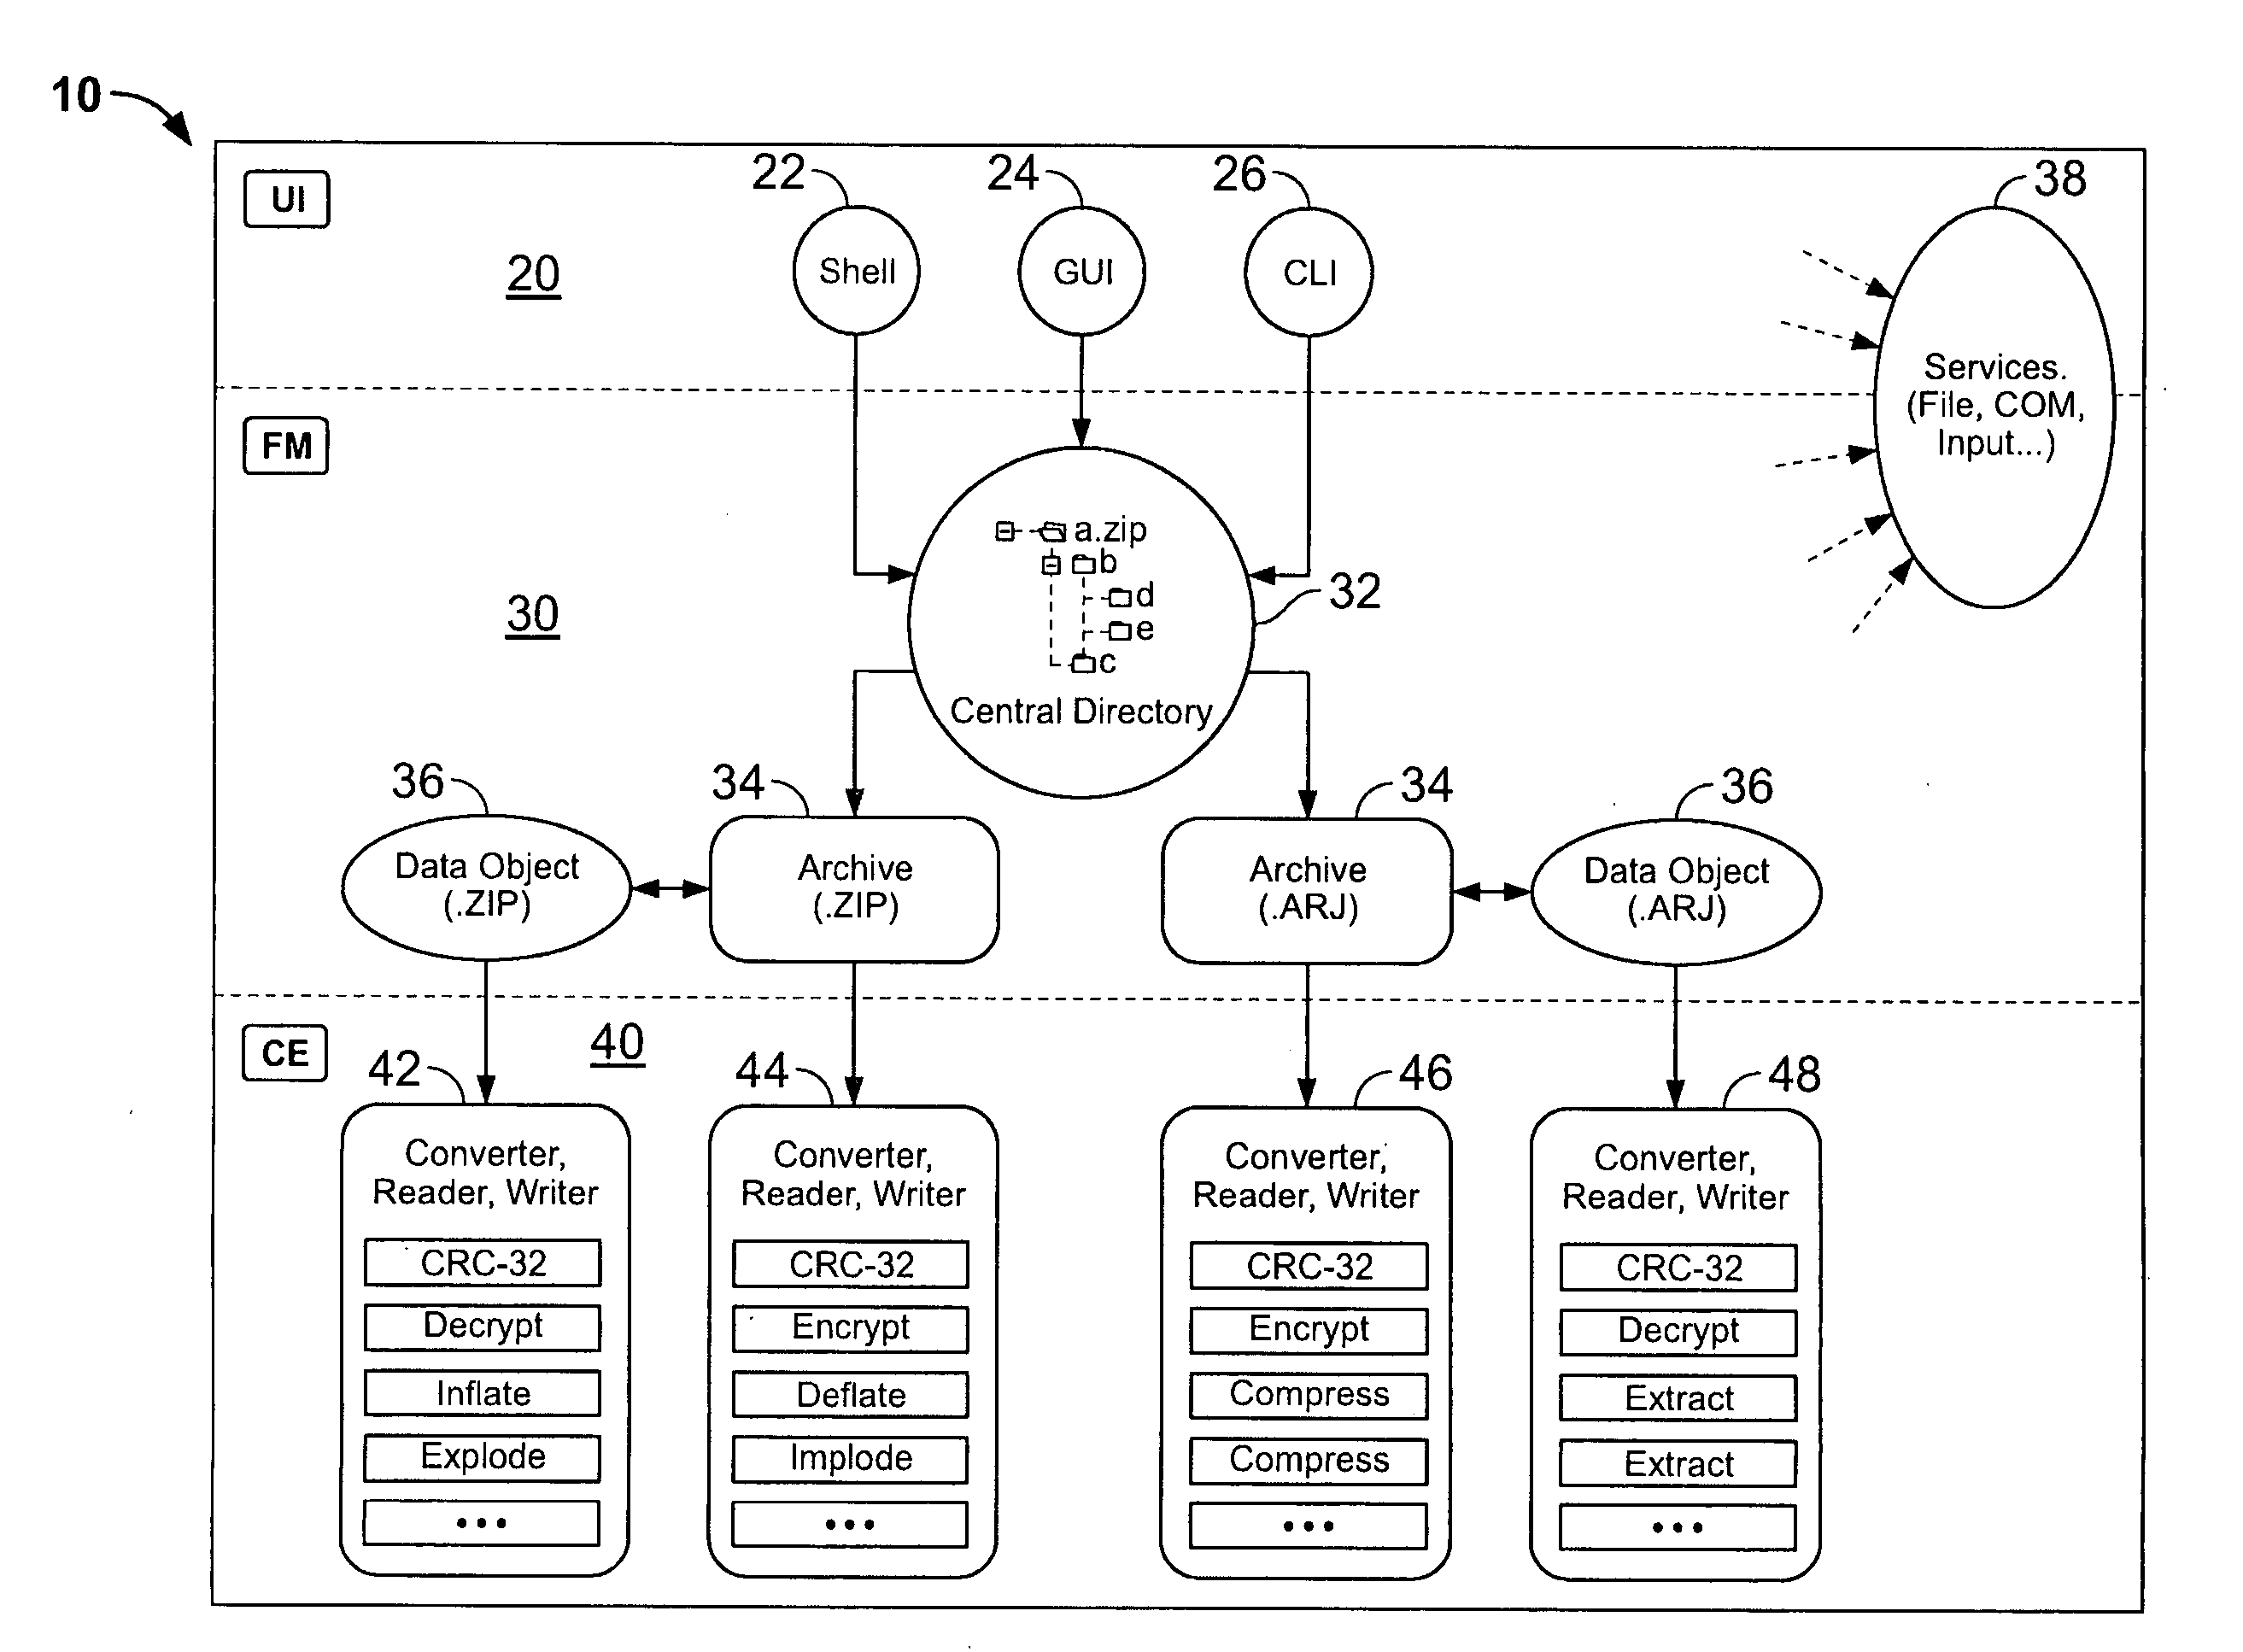 System and method for manipulating and managing computer archive files